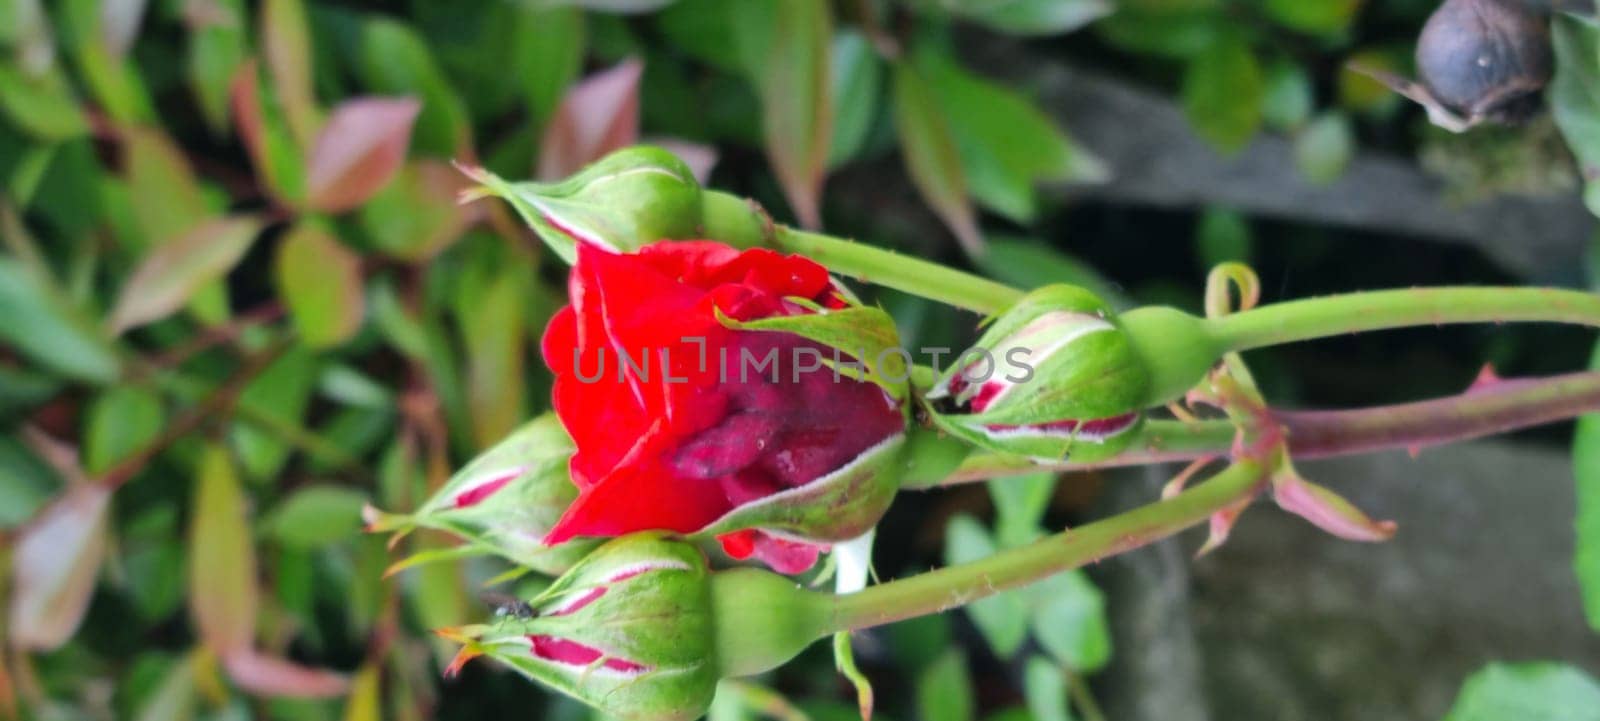 Vibrant red rosebud amidst green foliage by FlightVideo